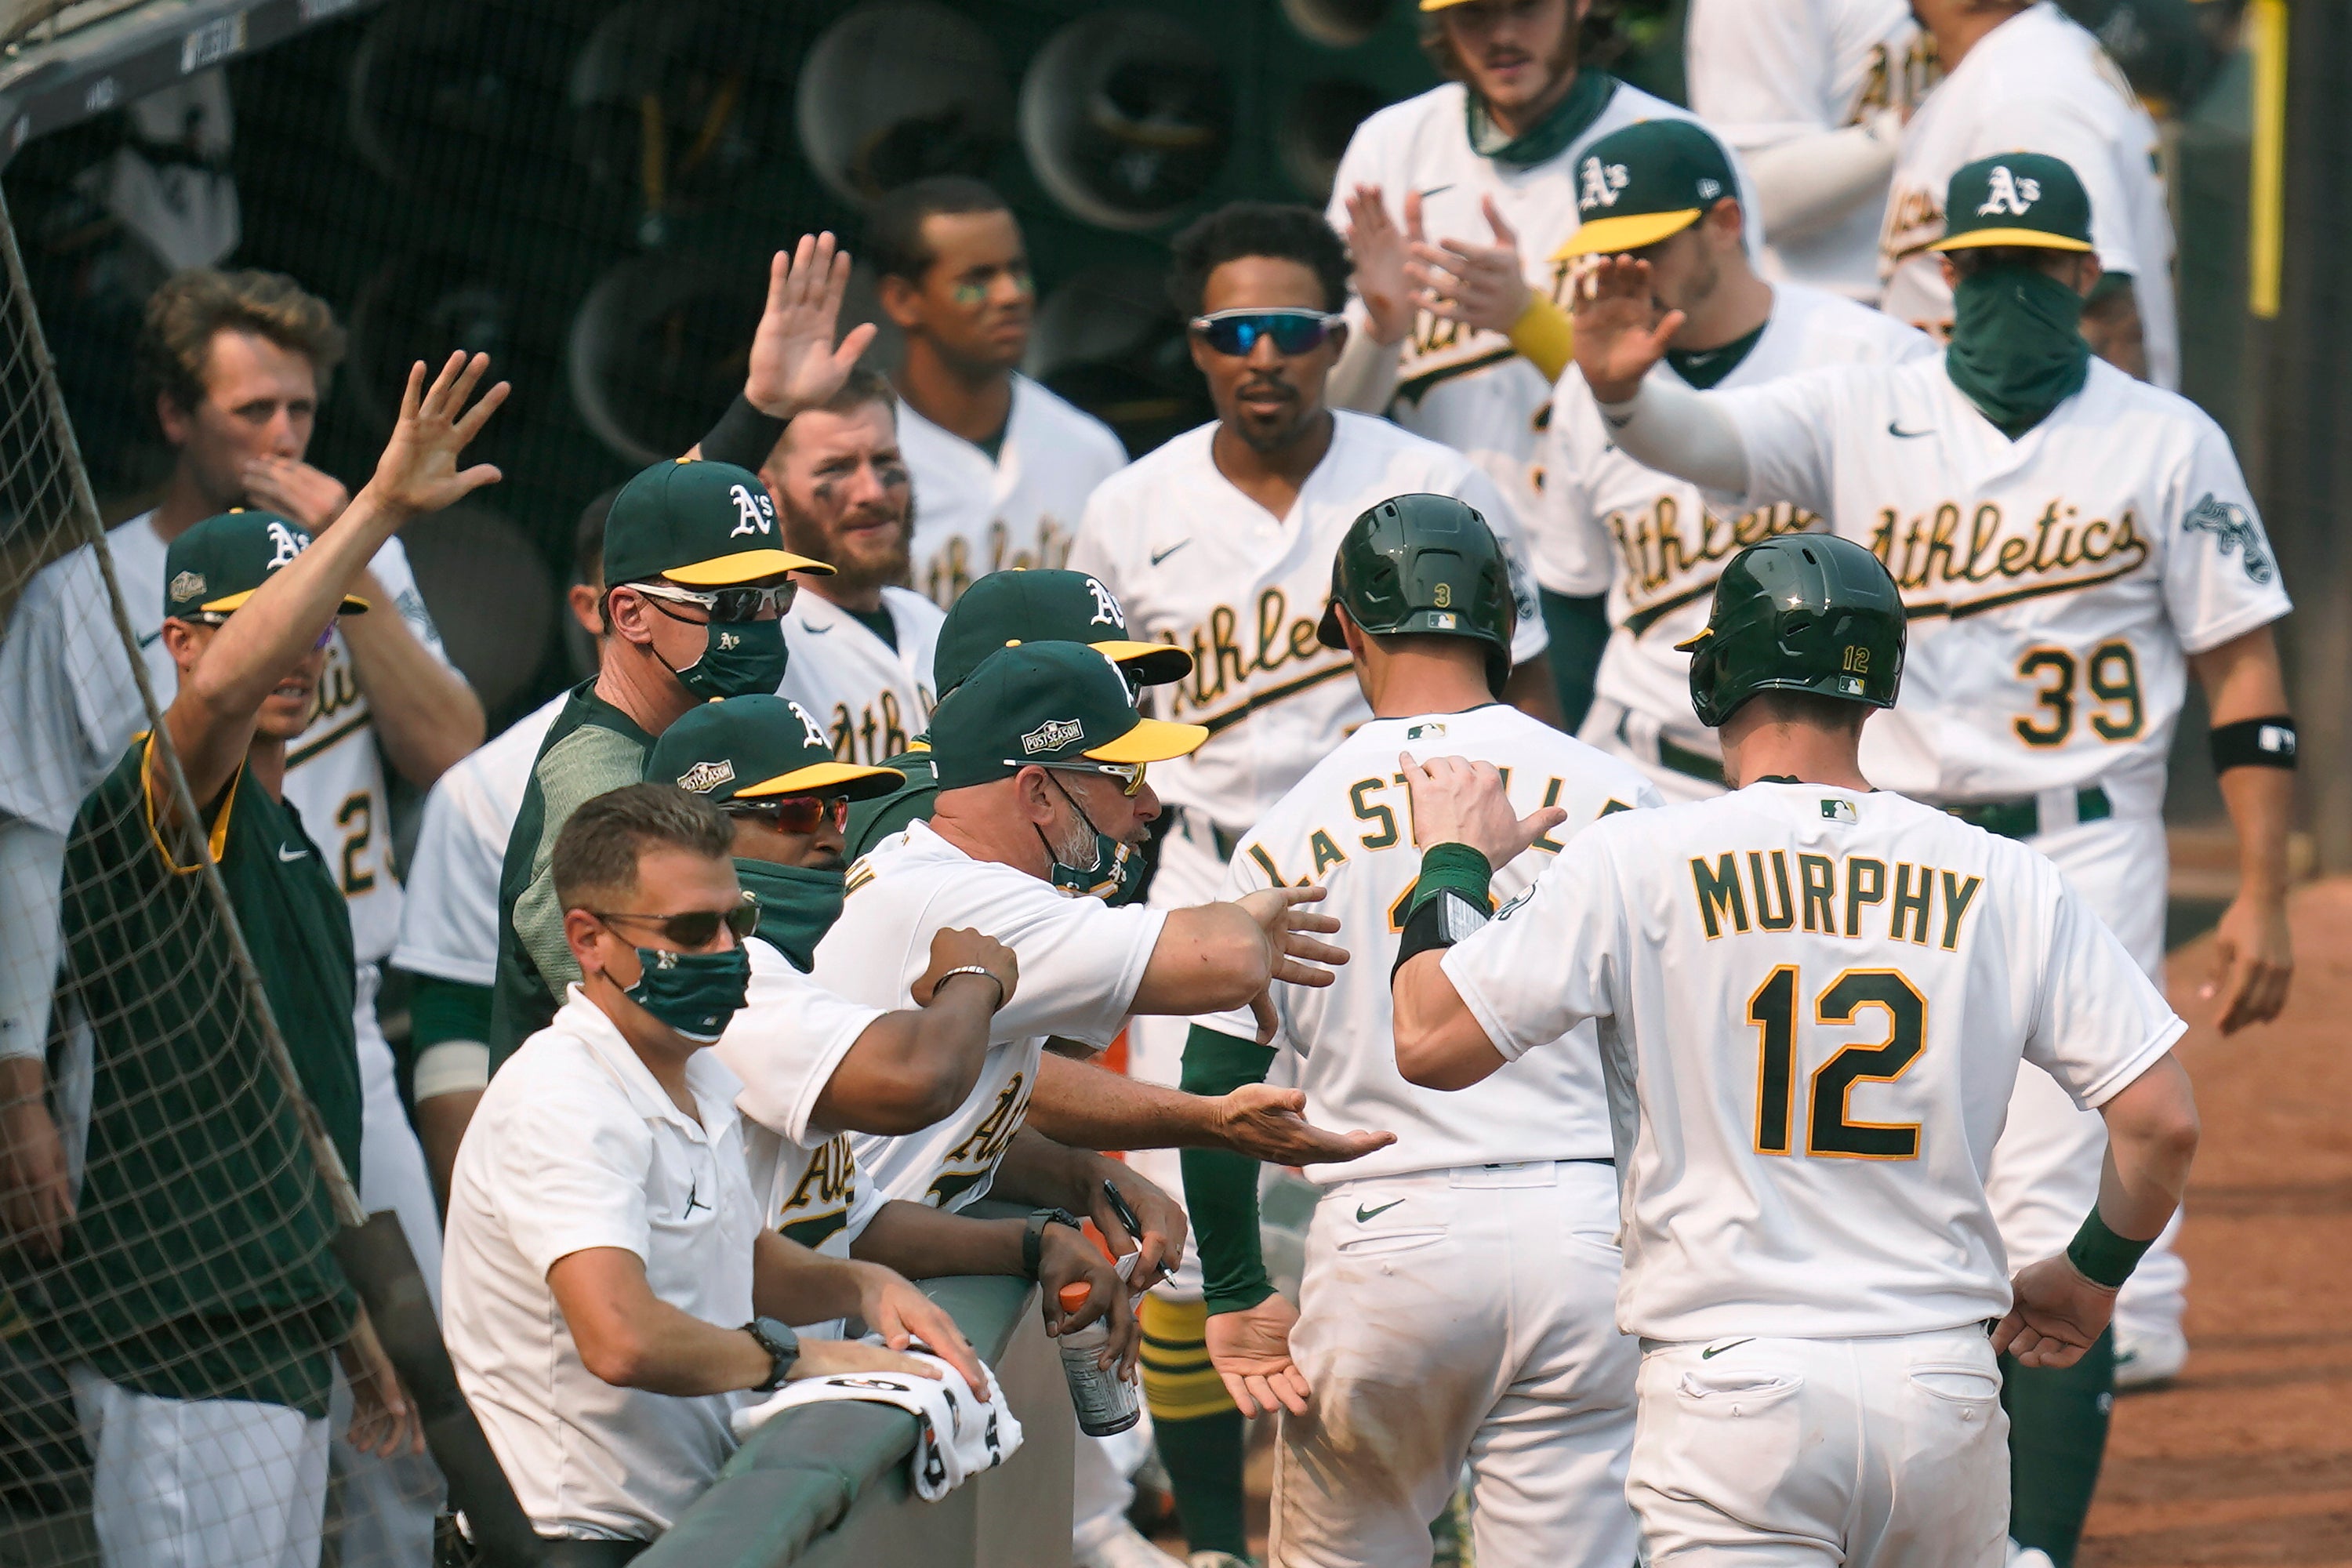 Pinder delivers timely hit, A's advance in playoffs at last a